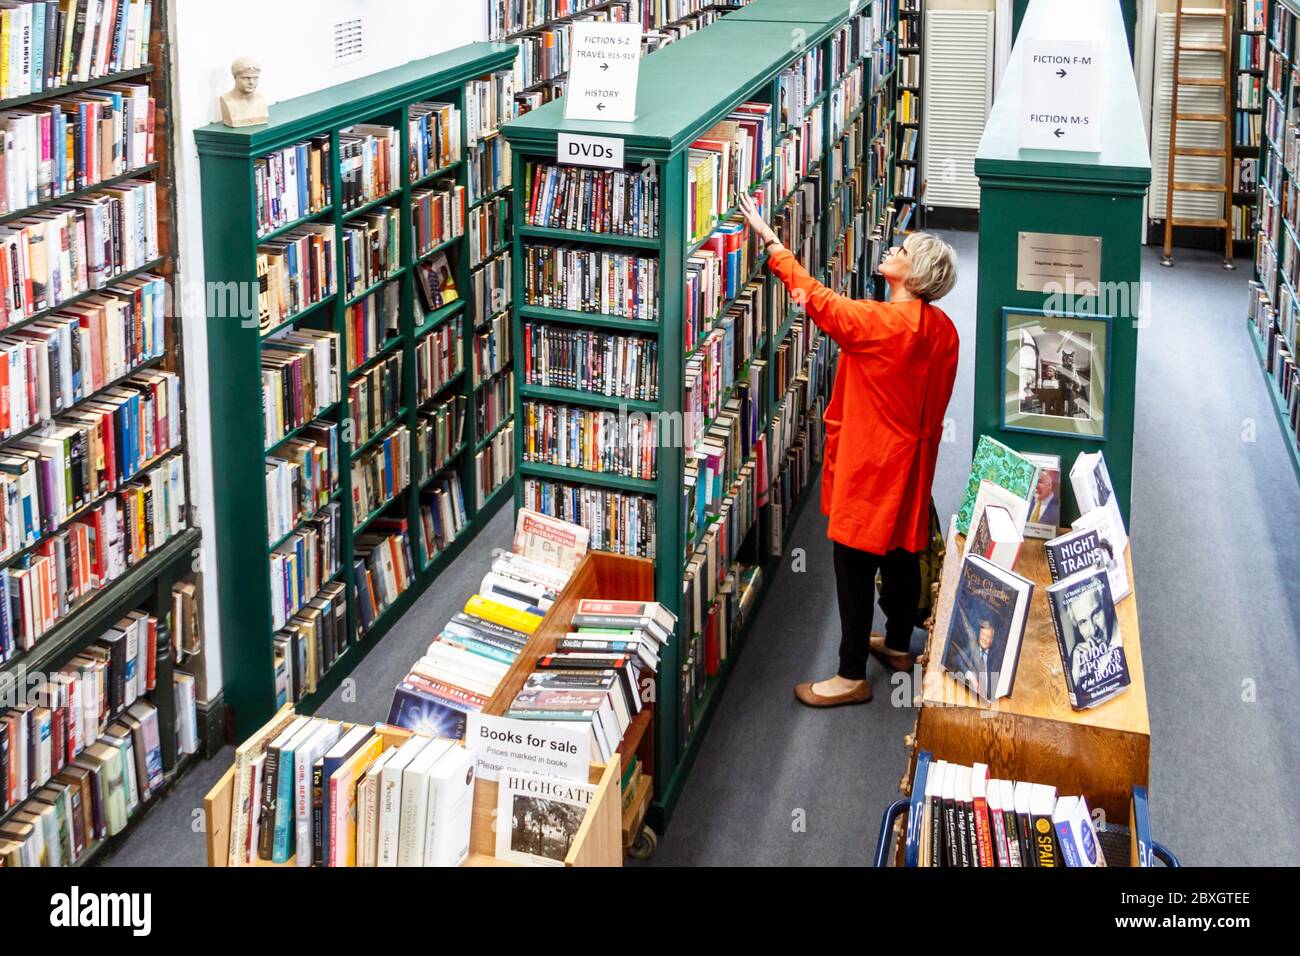 A woman in a red coat browsing the shelves of the HLSI library in Highgate Village, London, UK Stock Photo